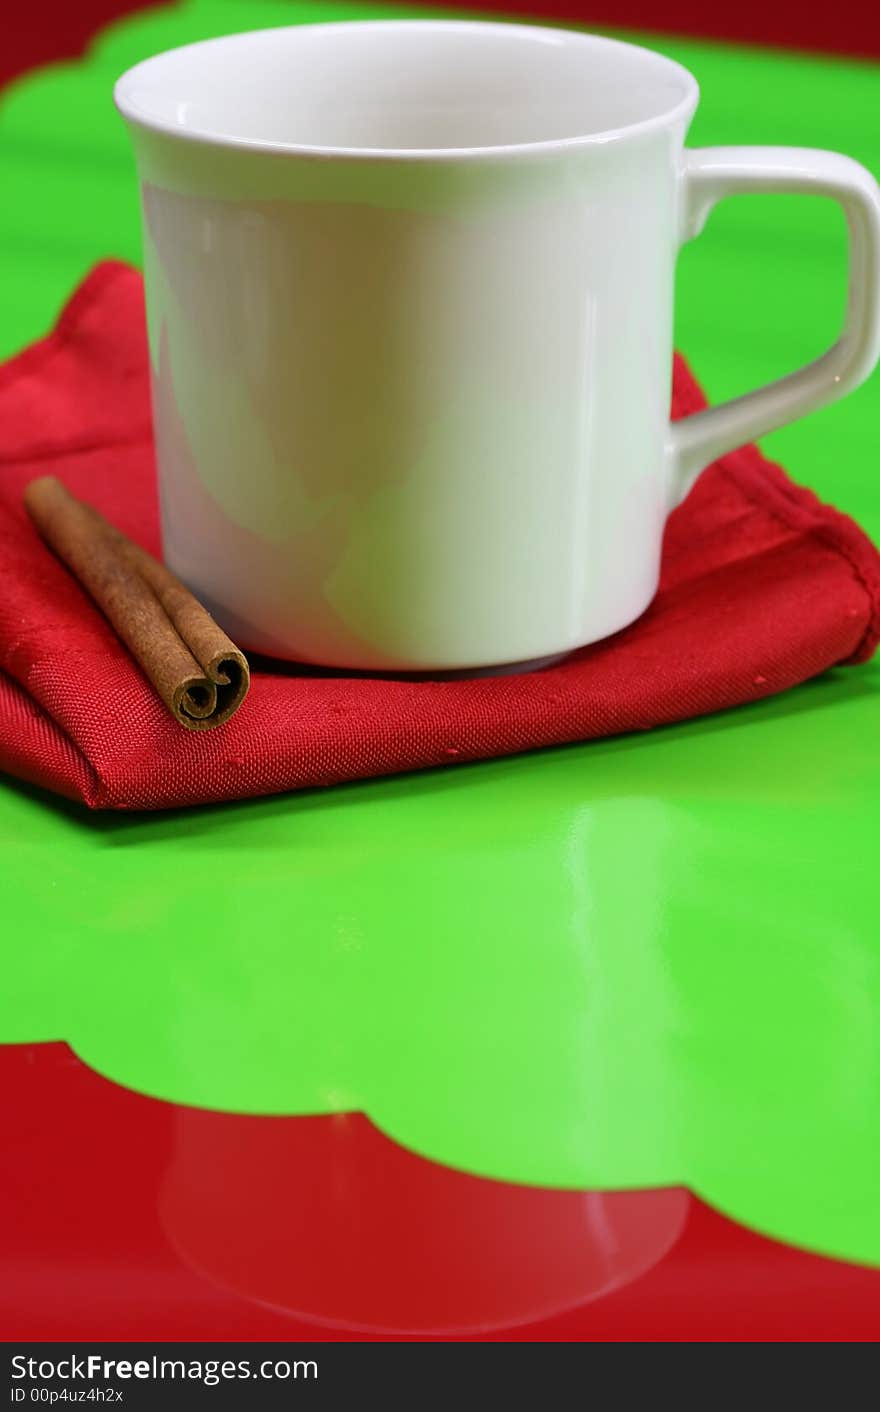 A coffee cup on a red and green table. A coffee cup on a red and green table